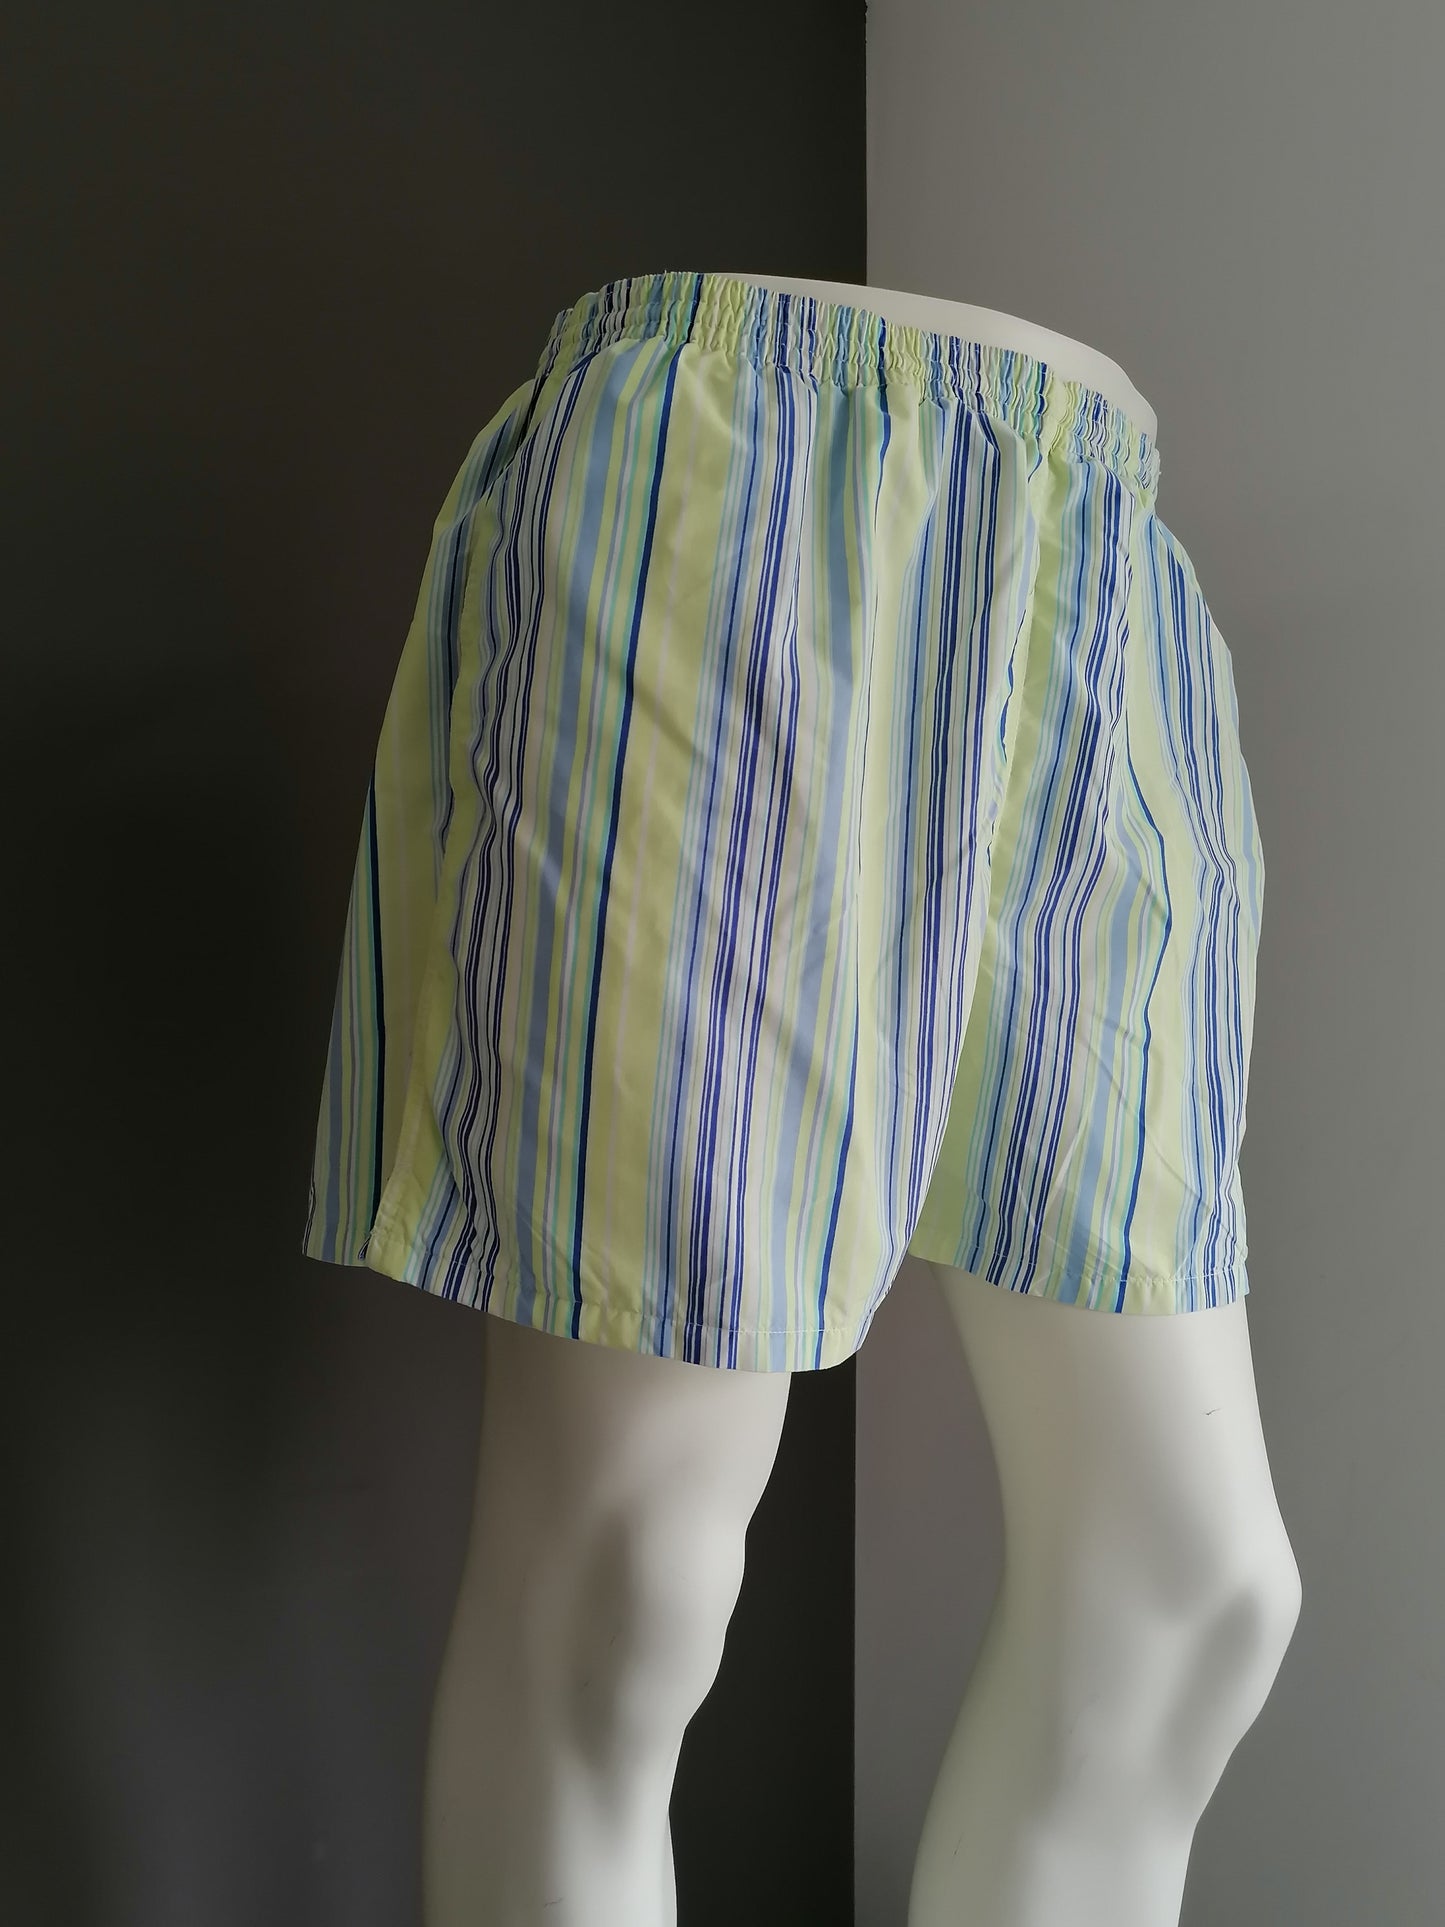 Faconnable swimming trunks / swimming shorts. Blue white green striped. Size XXL / 2XL.